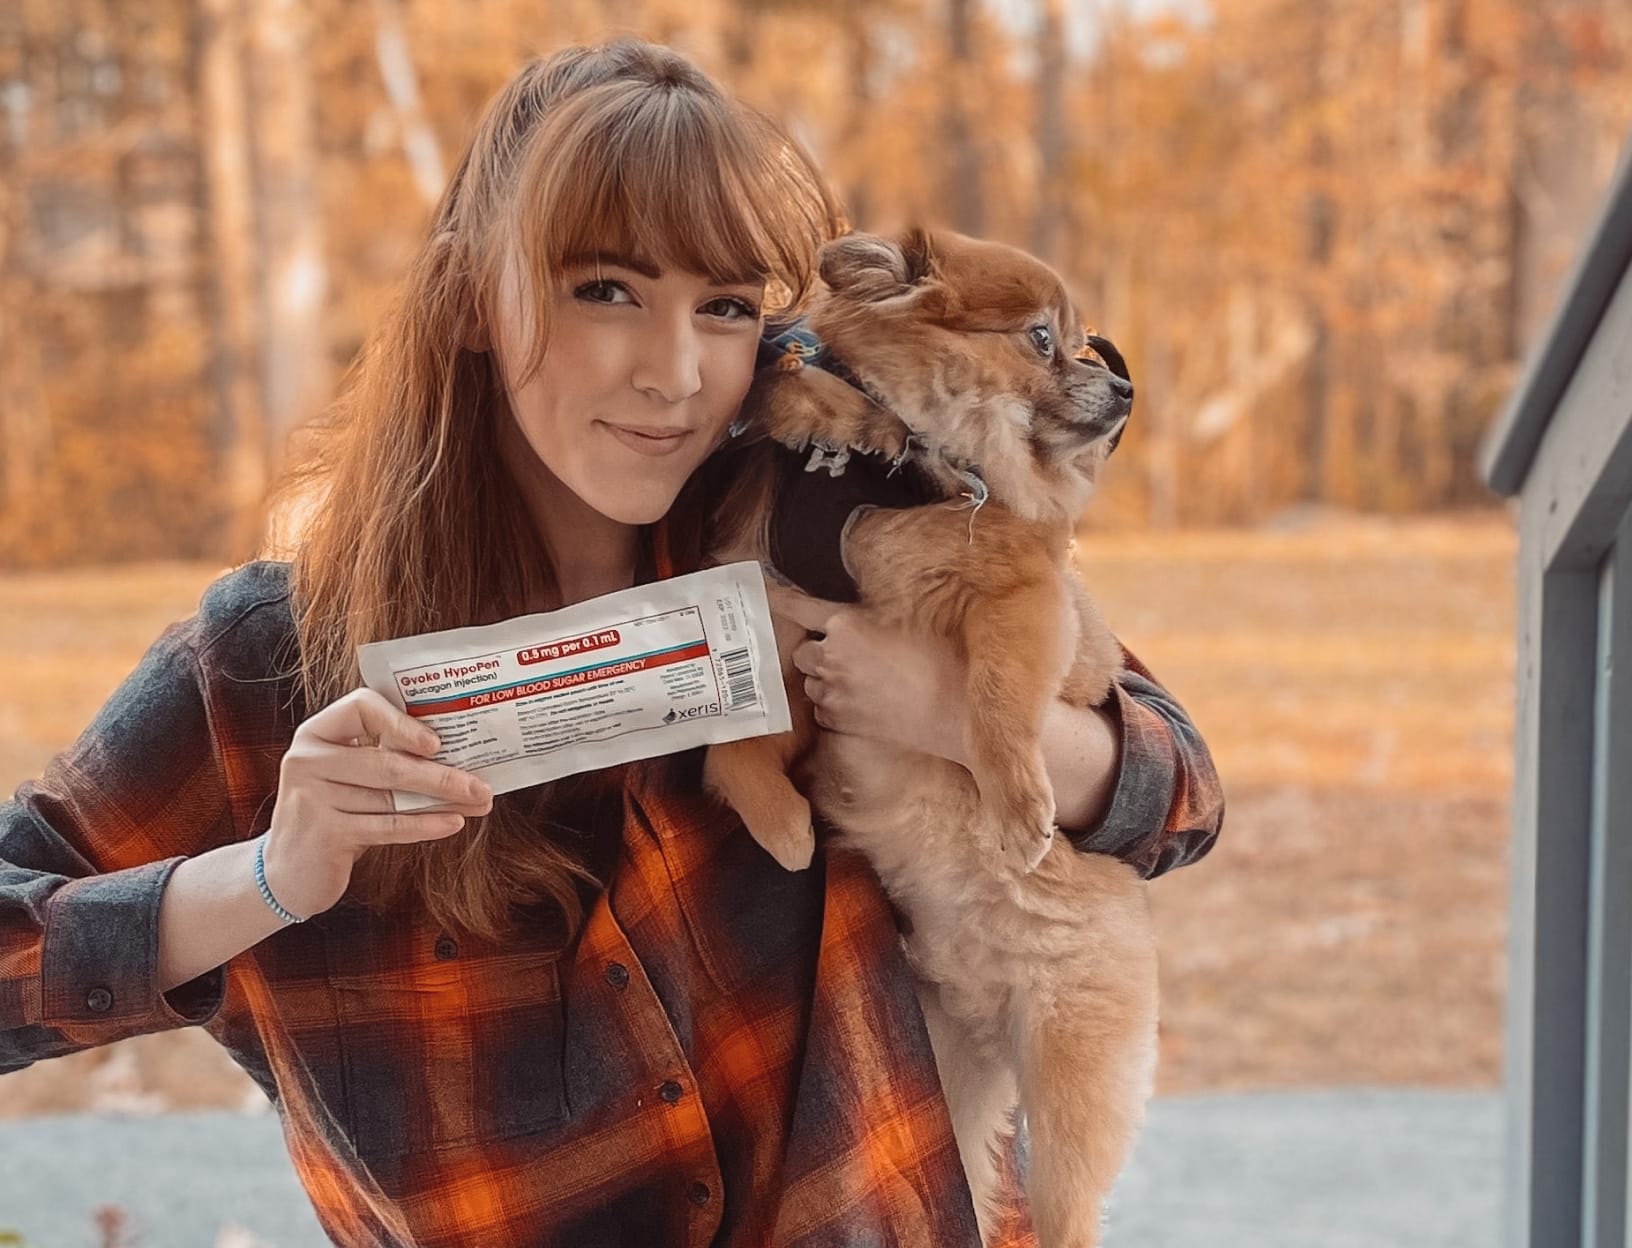 Woman with dog and Gvoke package.